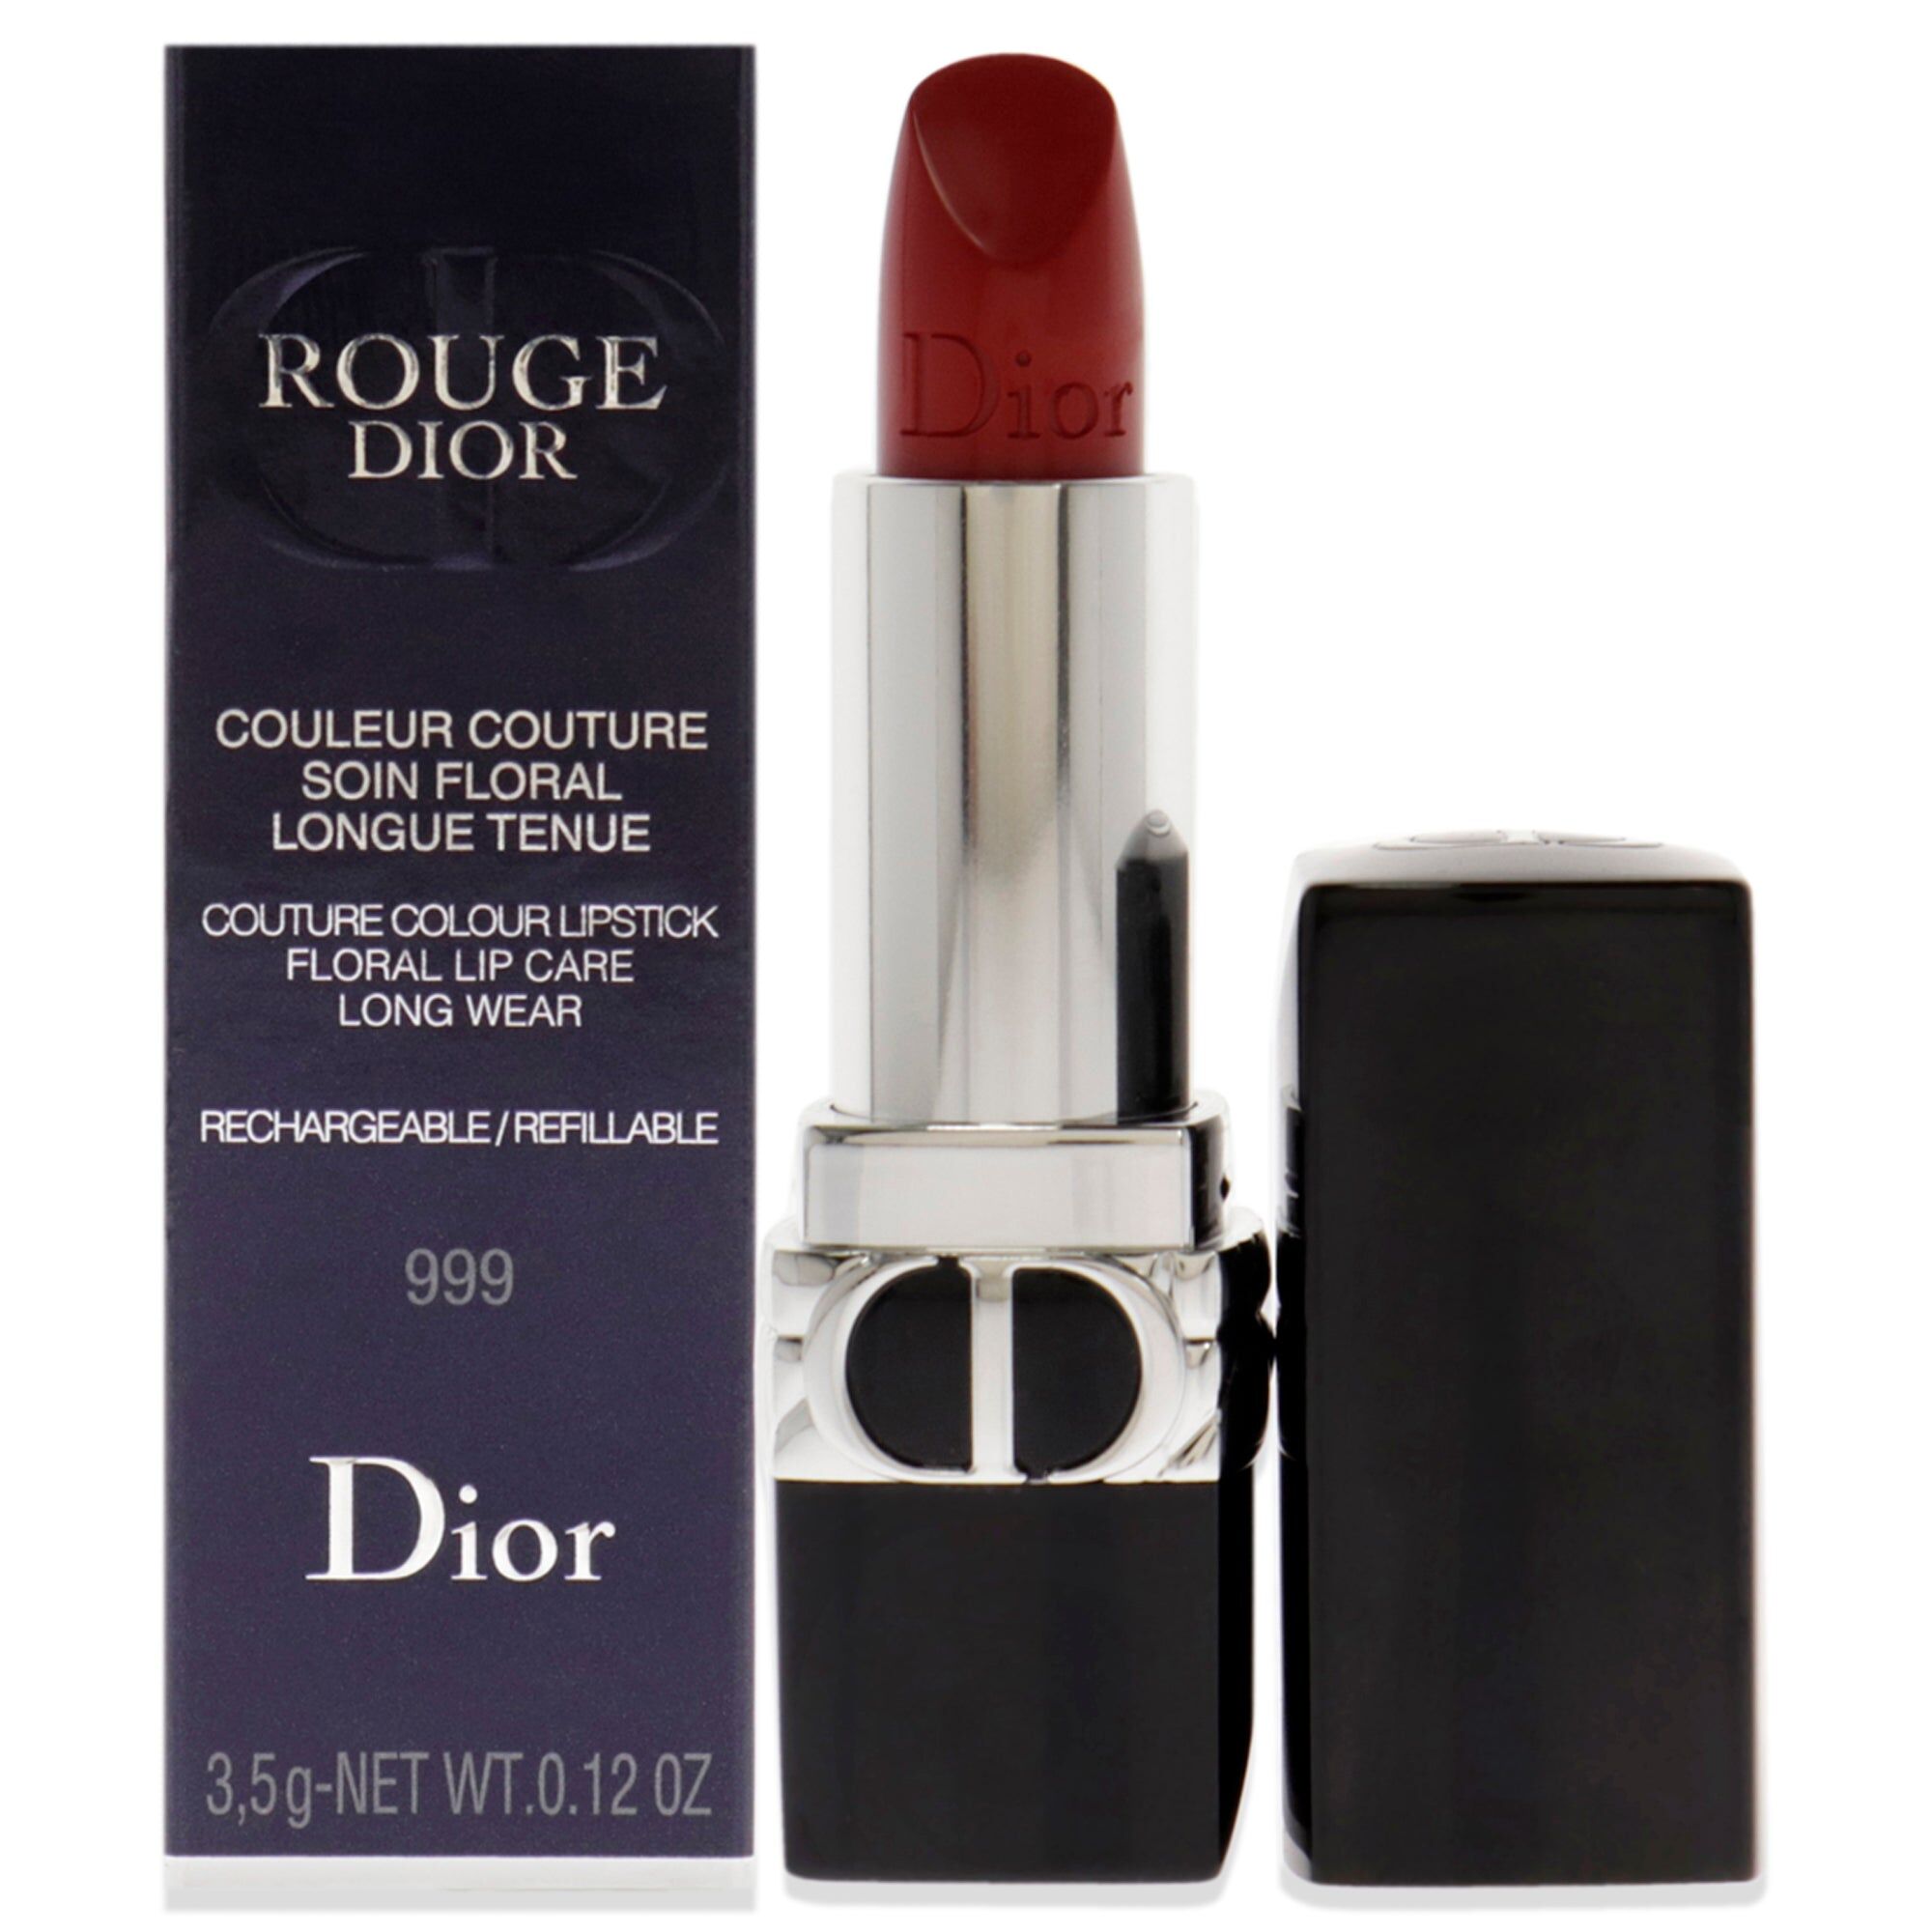 Rouge Dior Couture Lipstick Satin - 999 Red by Christian Dior for Women - 0.12 oz Lipstick (Refillable) One Size